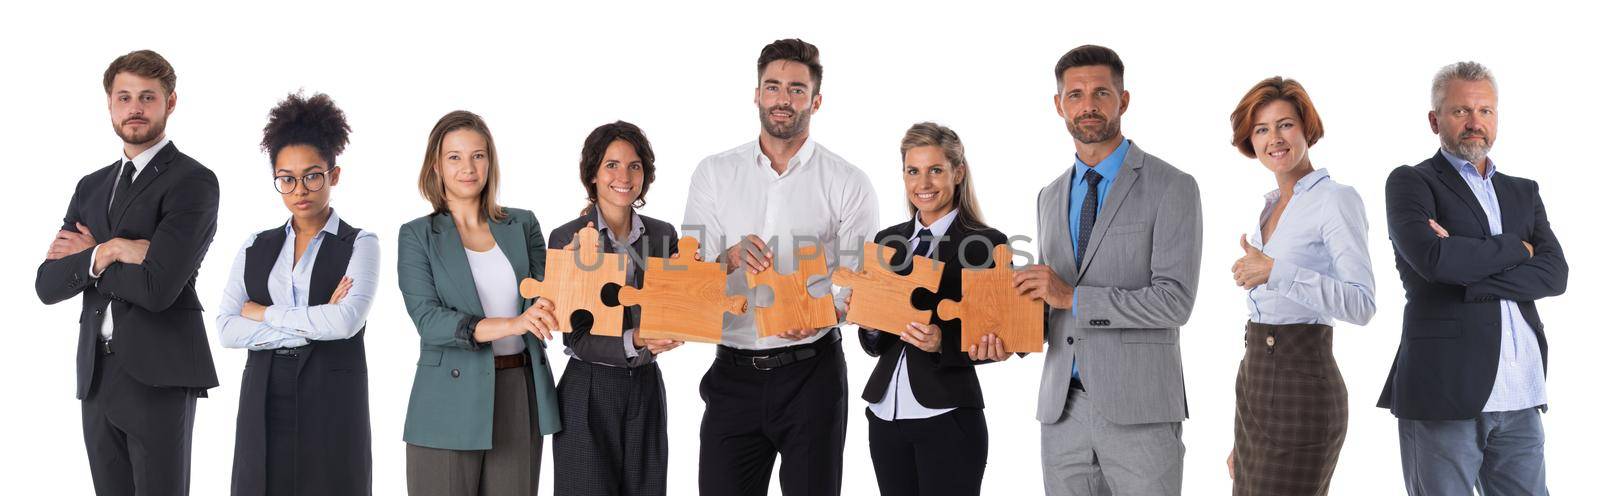 Group of business people standing together in a row holding pieces of a puzzle - isolated on white background